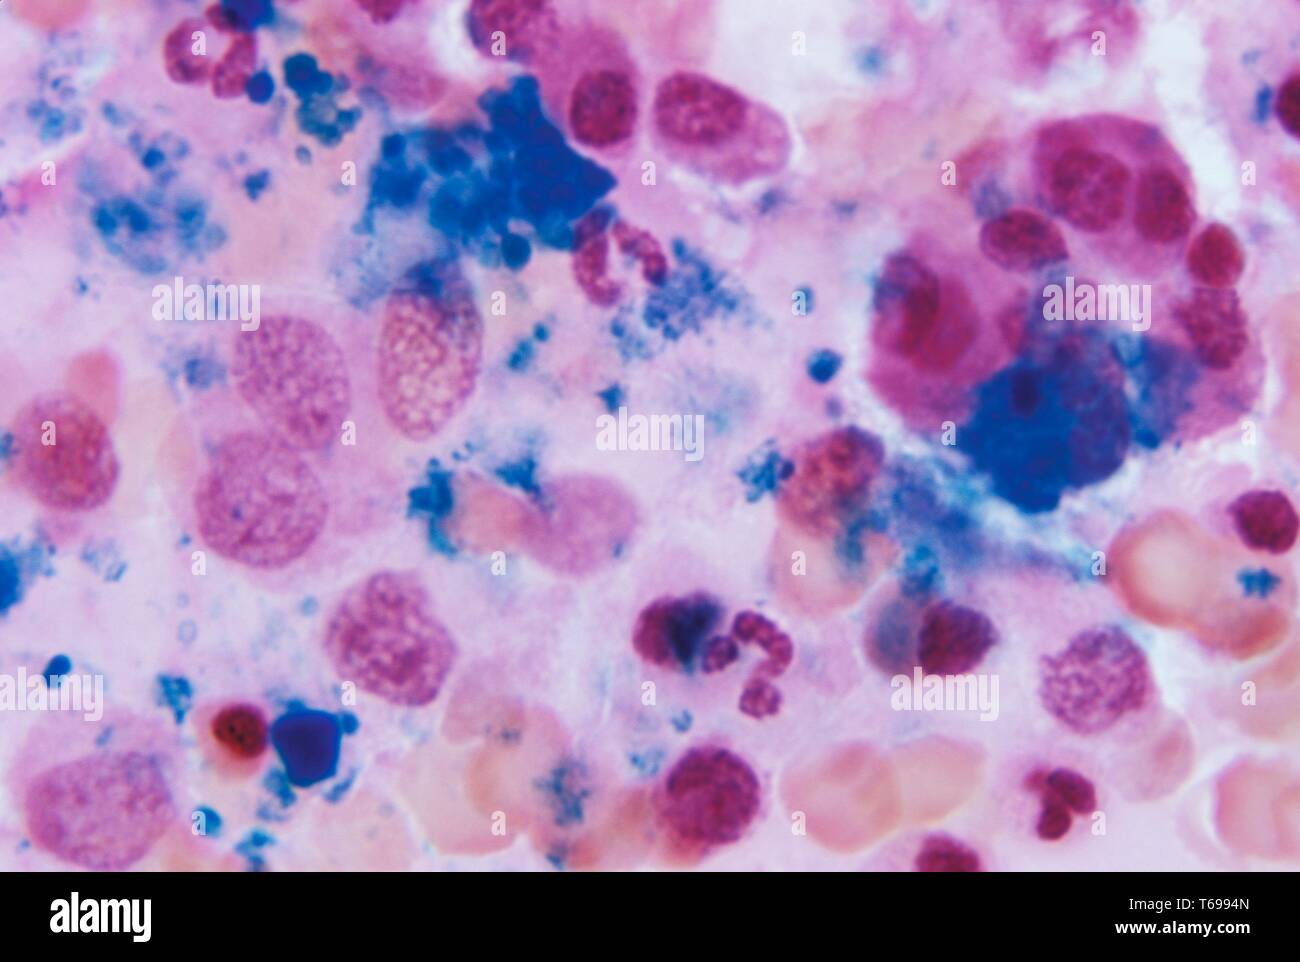 This photomicrograph of bone marrow tissue shows a normal amount of iron stores using Prussian blue stain, 1972. Normal iron stores are seen as dark blue-staining material in the bone marrow. A person unable to maintain a balanced, iron-rich diet may suffer from some degree of Iron Deficiency Anemia, or IDA. Image courtesy CDC/Dr. Gordon D. McLaren. Stock Photo